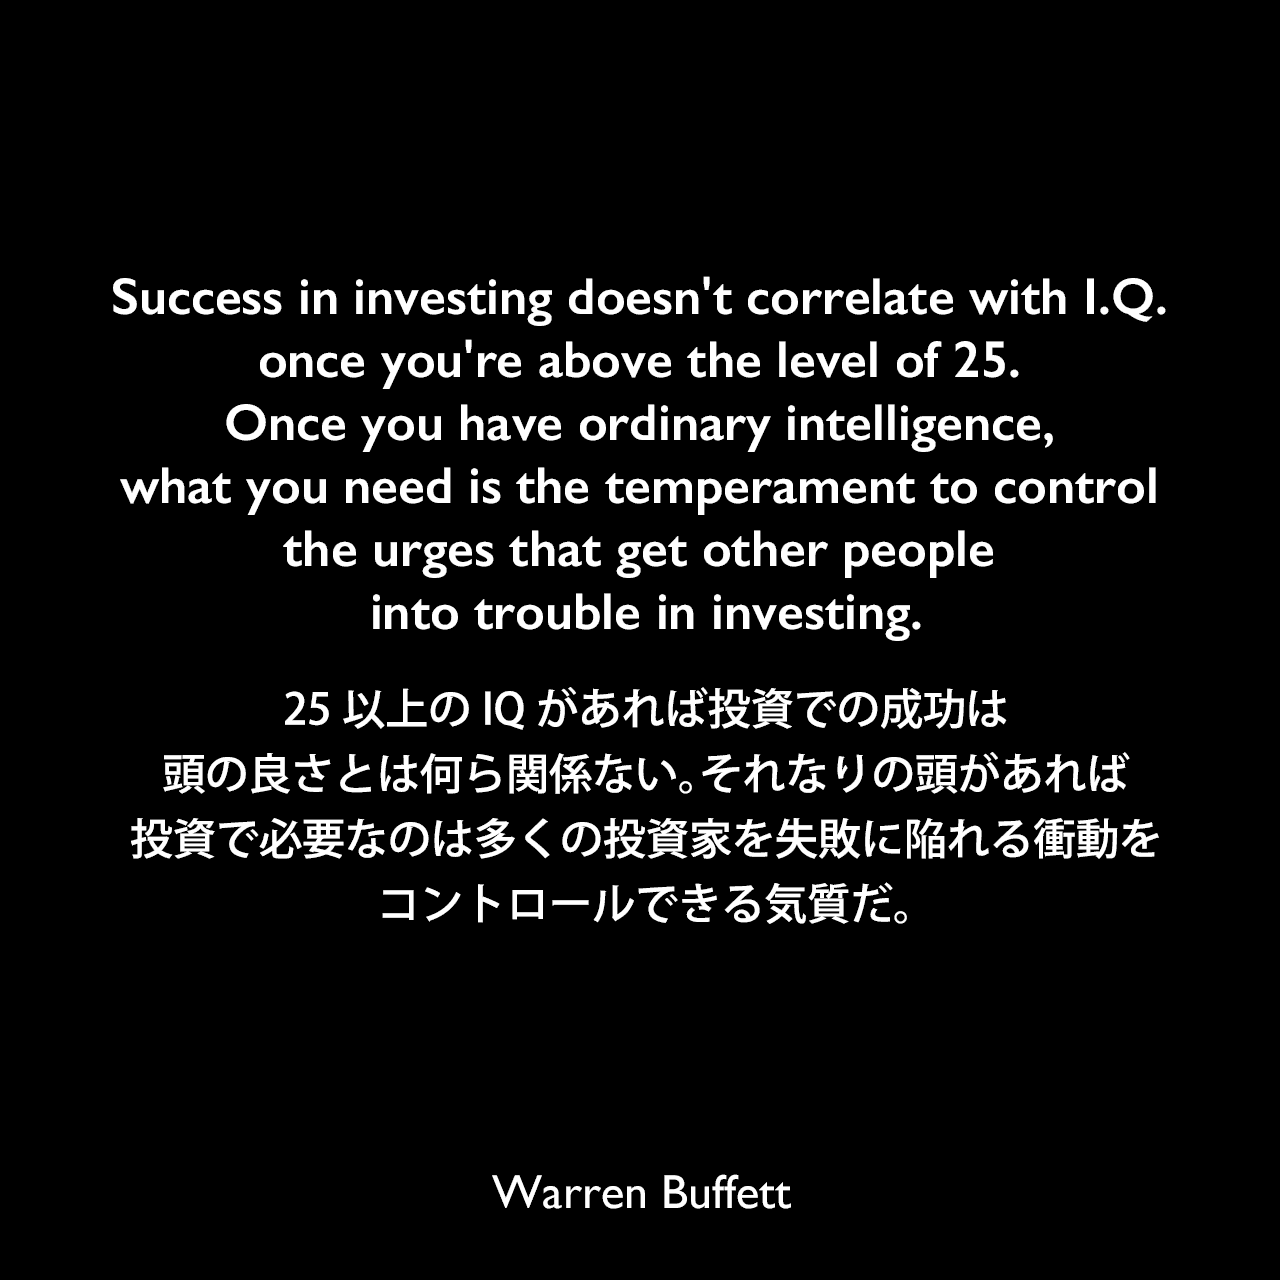 Success in investing doesn't correlate with I.Q. once you're above the level of 25. Once you have ordinary intelligence, what you need is the temperament to control the urges that get other people into trouble in investing.25以上のIQがあれば投資での成功は頭の良さとは何ら関係ない。それなりの頭があれば、投資で必要なのは多くの投資家を失敗に陥れる衝動をコントロールできる気質だ。Warren Buffett